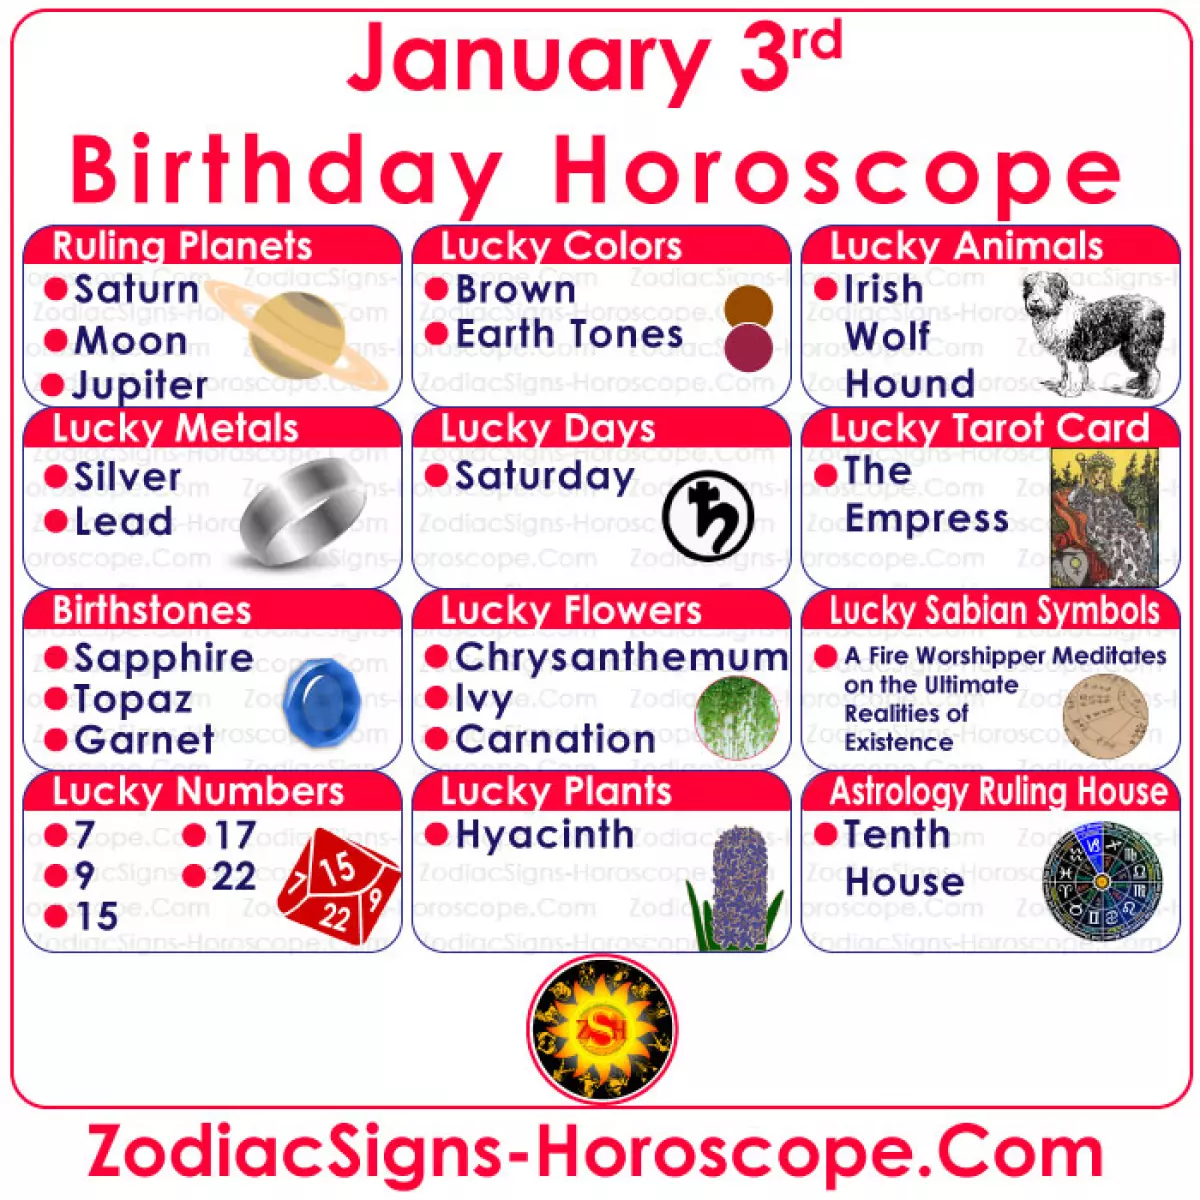 January 3 Zodiac Birthstones, Lucky Numbers, Days, Colors and More